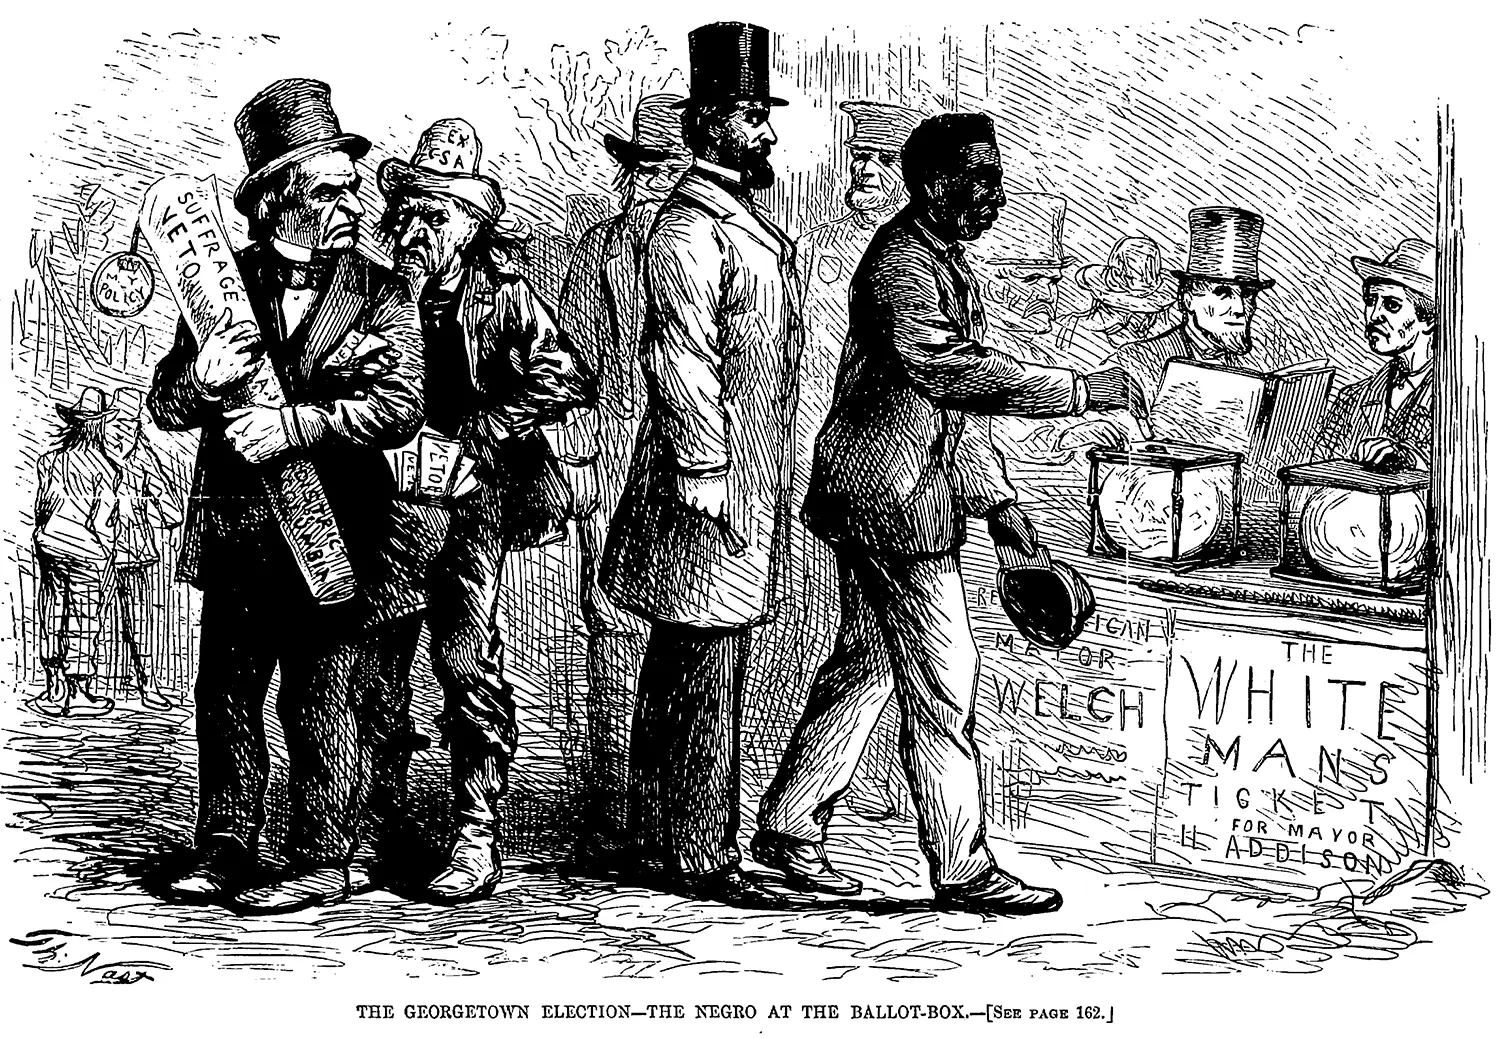 Cartoon of a black man placing a ballot, surrounded by white men grimacing at him and staring at him distrustfully. A banner says “The White Man’s Ticket.”